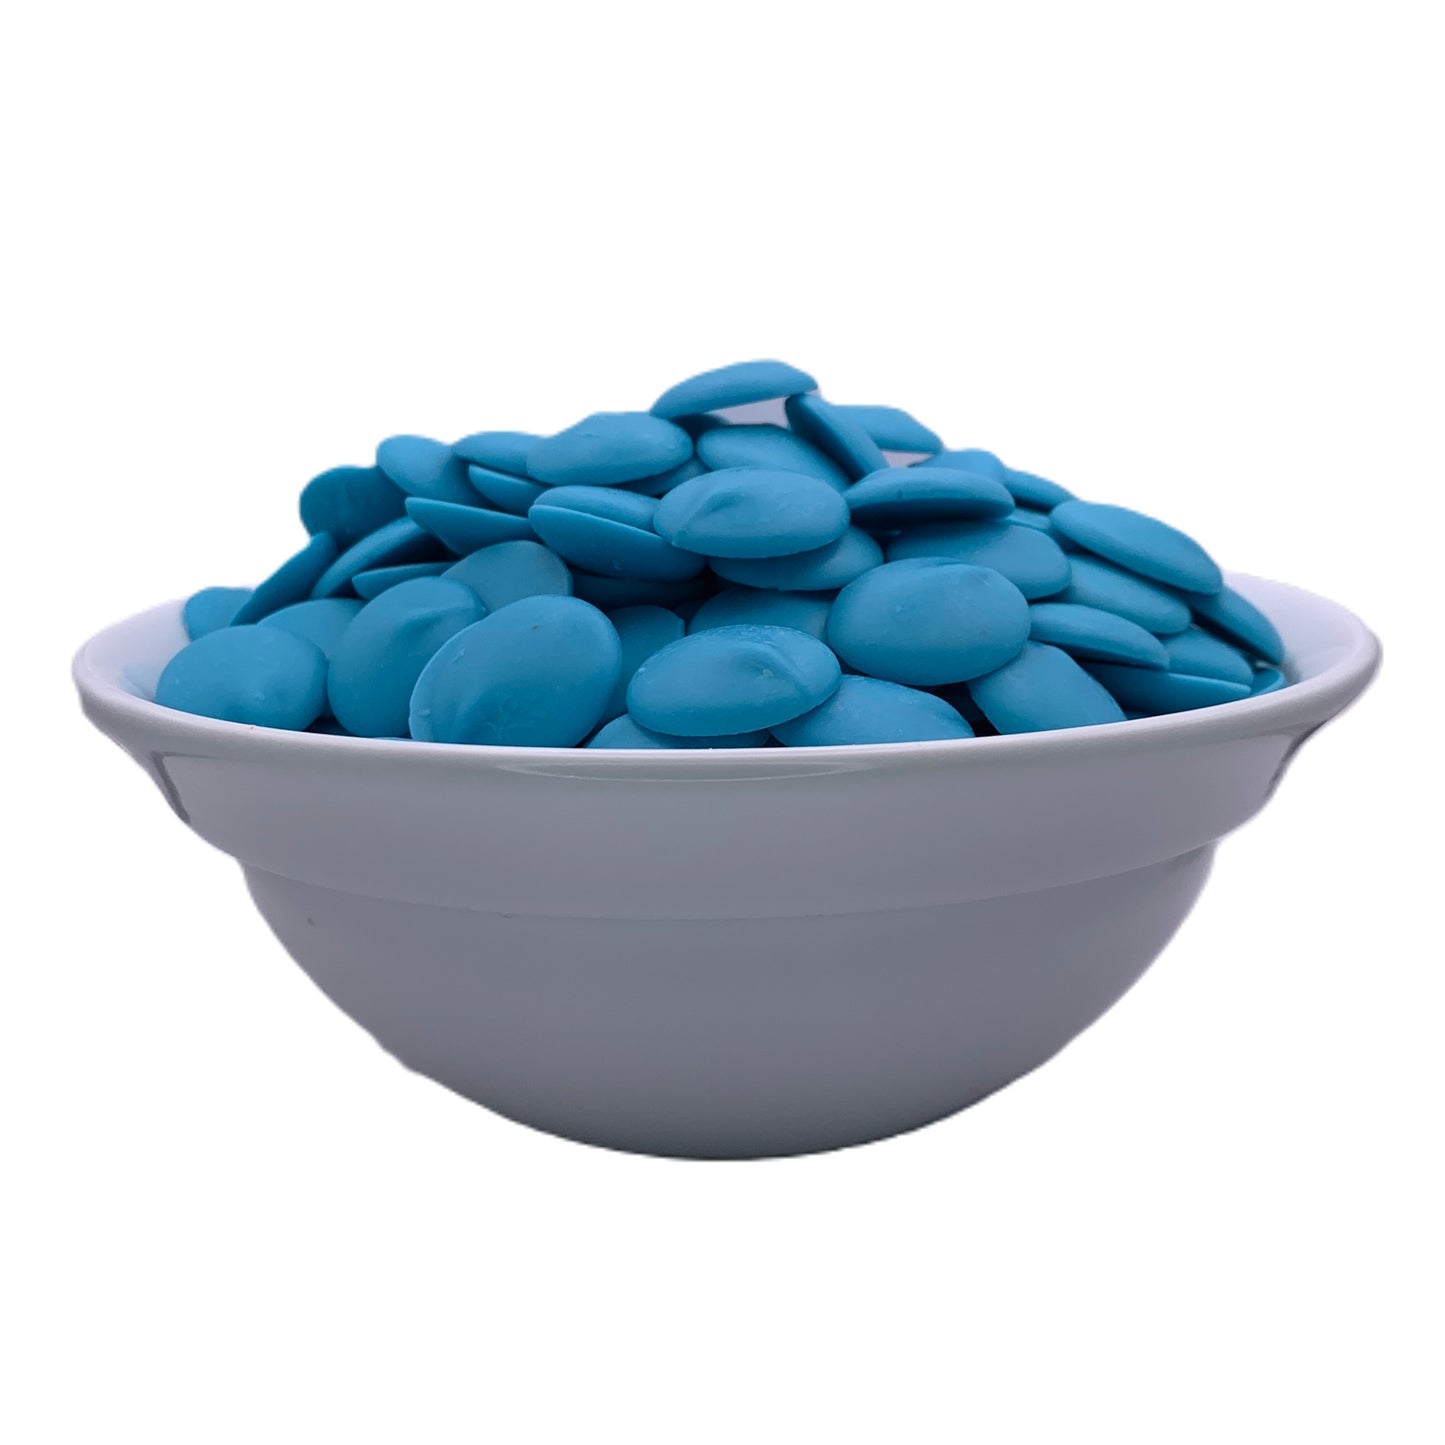 A bowl of Merckens blue chocolate melting wafers presented from a front angle, featuring a cool blue shade perfect for themed parties or creative confectionery.